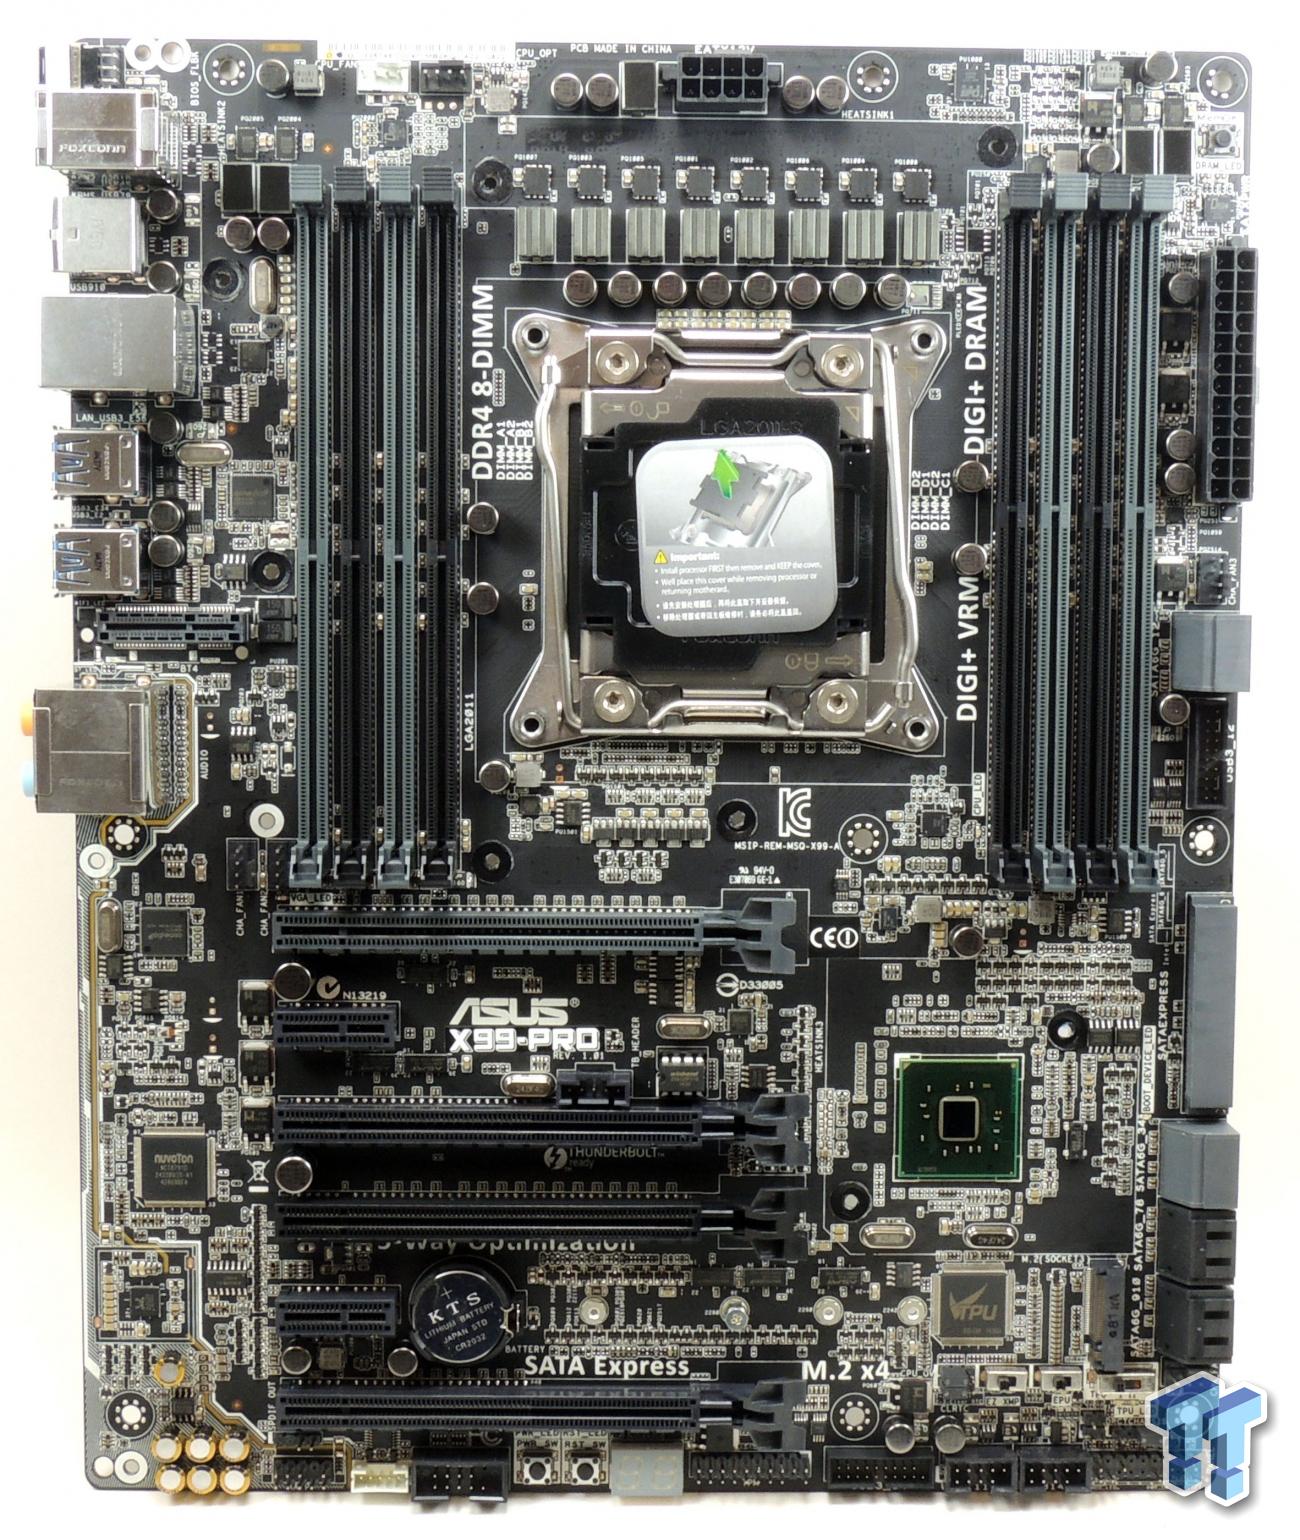 ASUS X99-PRO Motherboard (Intel X99) Review